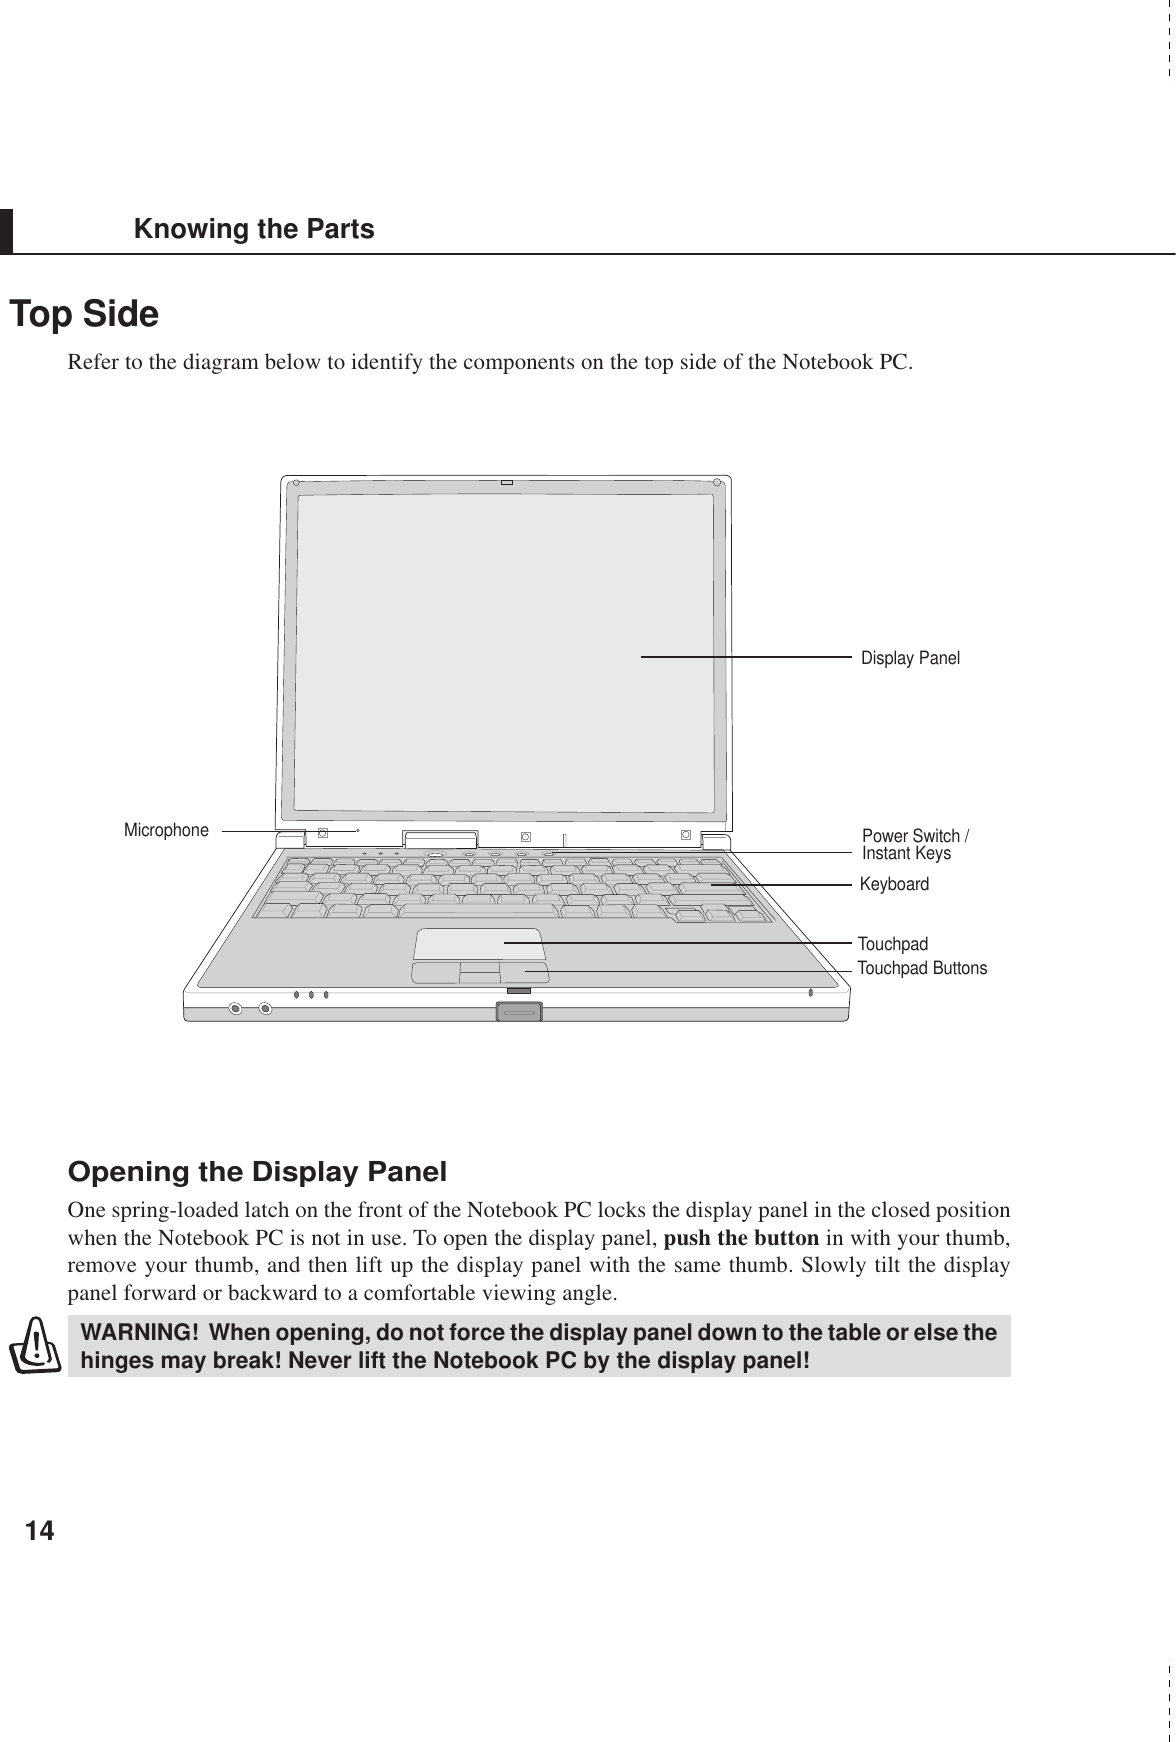 14Knowing the PartsTop SideRefer to the diagram below to identify the components on the top side of the Notebook PC.Opening the Display PanelOne spring-loaded latch on the front of the Notebook PC locks the display panel in the closed positionwhen the Notebook PC is not in use. To open the display panel, push the button in with your thumb,remove your thumb, and then lift up the display panel with the same thumb. Slowly tilt the displaypanel forward or backward to a comfortable viewing angle.WARNING!  When opening, do not force the display panel down to the table or else thehinges may break! Never lift the Notebook PC by the display panel!Display PanelTouchpad ButtonsKeyboardMicrophoneTouchpadPower Switch /Instant Keys